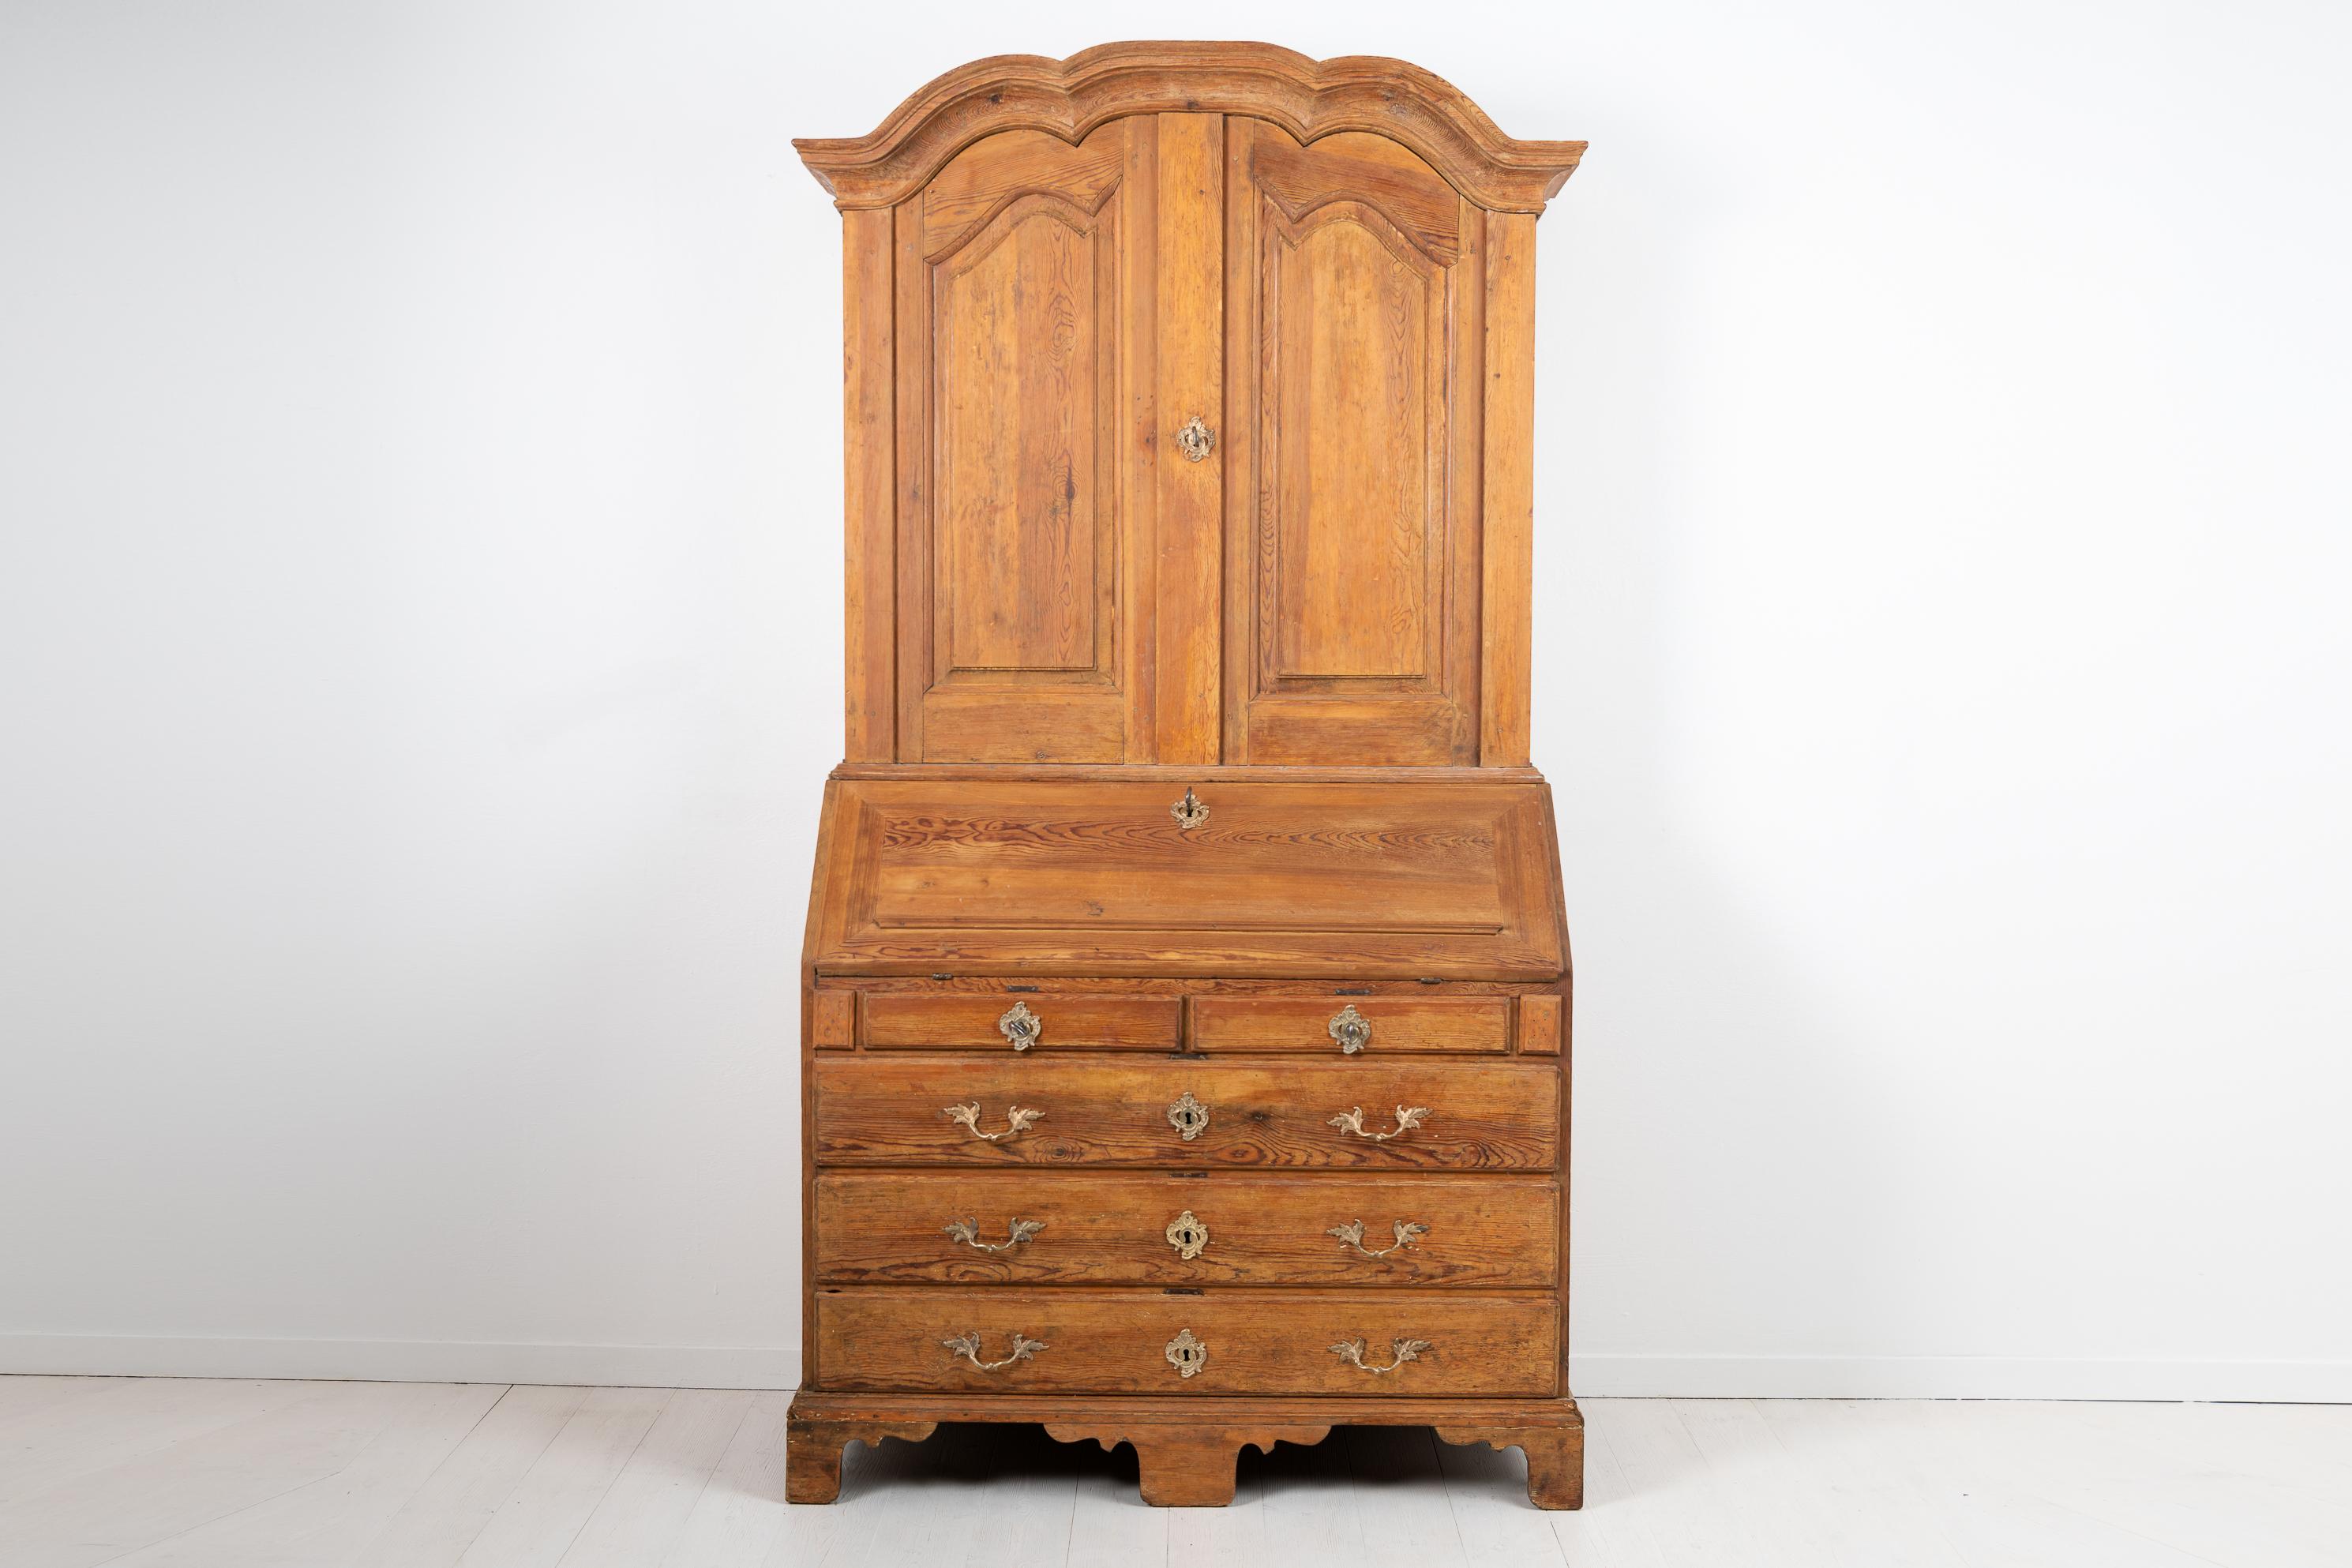 Elegant Swedish bureau cabinet most likely made around Stockholm during the transition period between baroque and rococo. The cabinet is in two parts and the exterior is unpainted pine. The interior has the original blue paint with multiple small